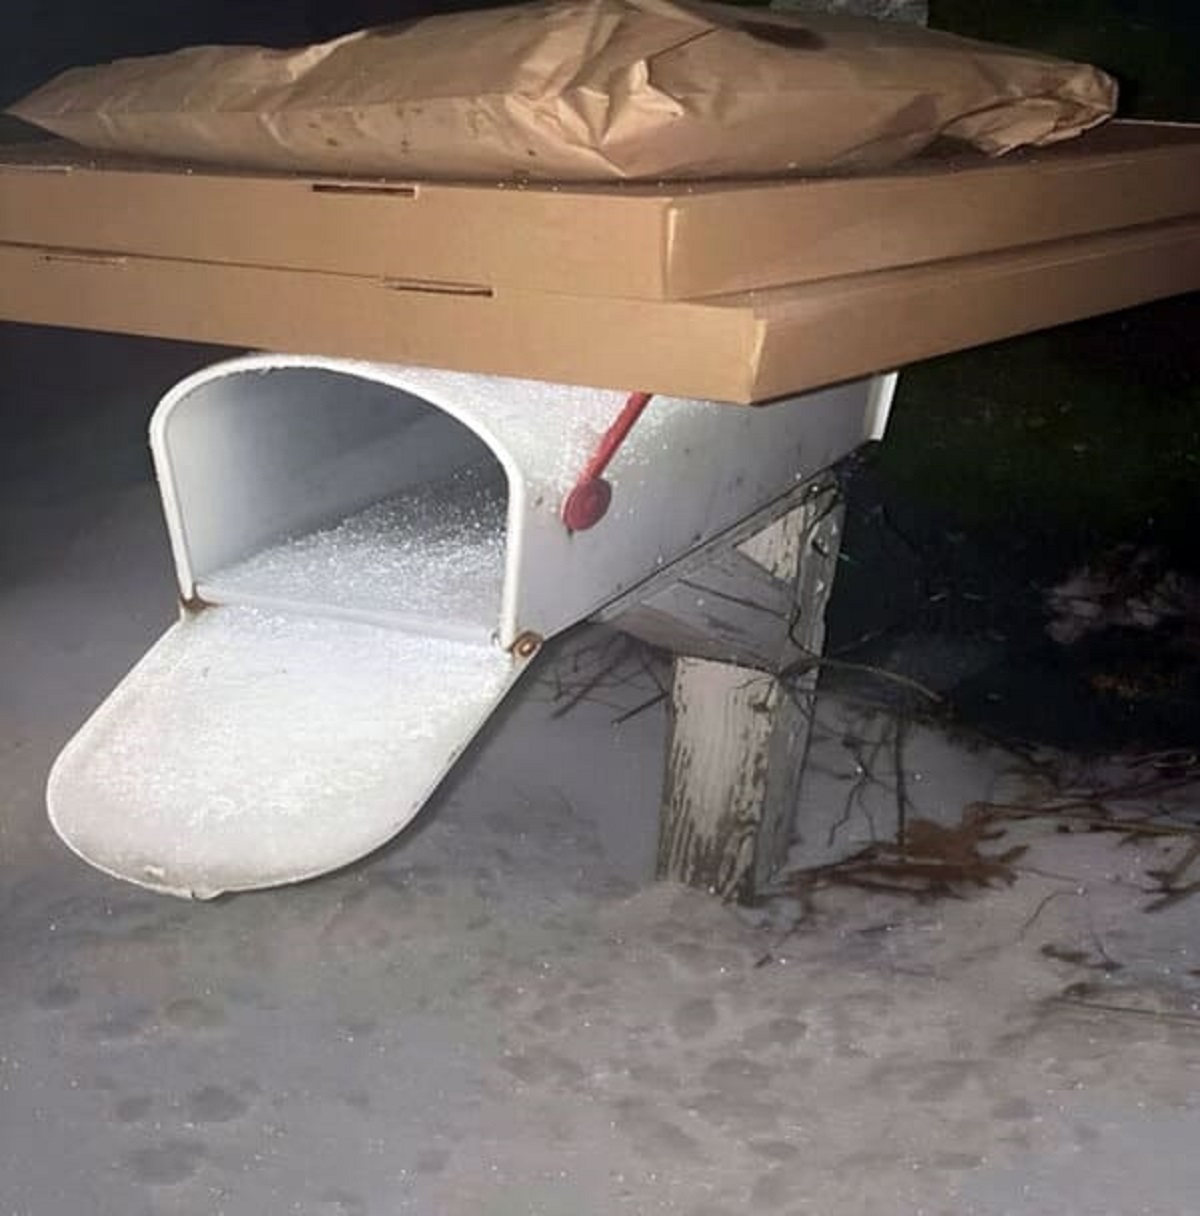 “Uber Eats Left The Order At The End Of The Driveway In The Freezing Rain/Snow Balanced On The Mailbox”